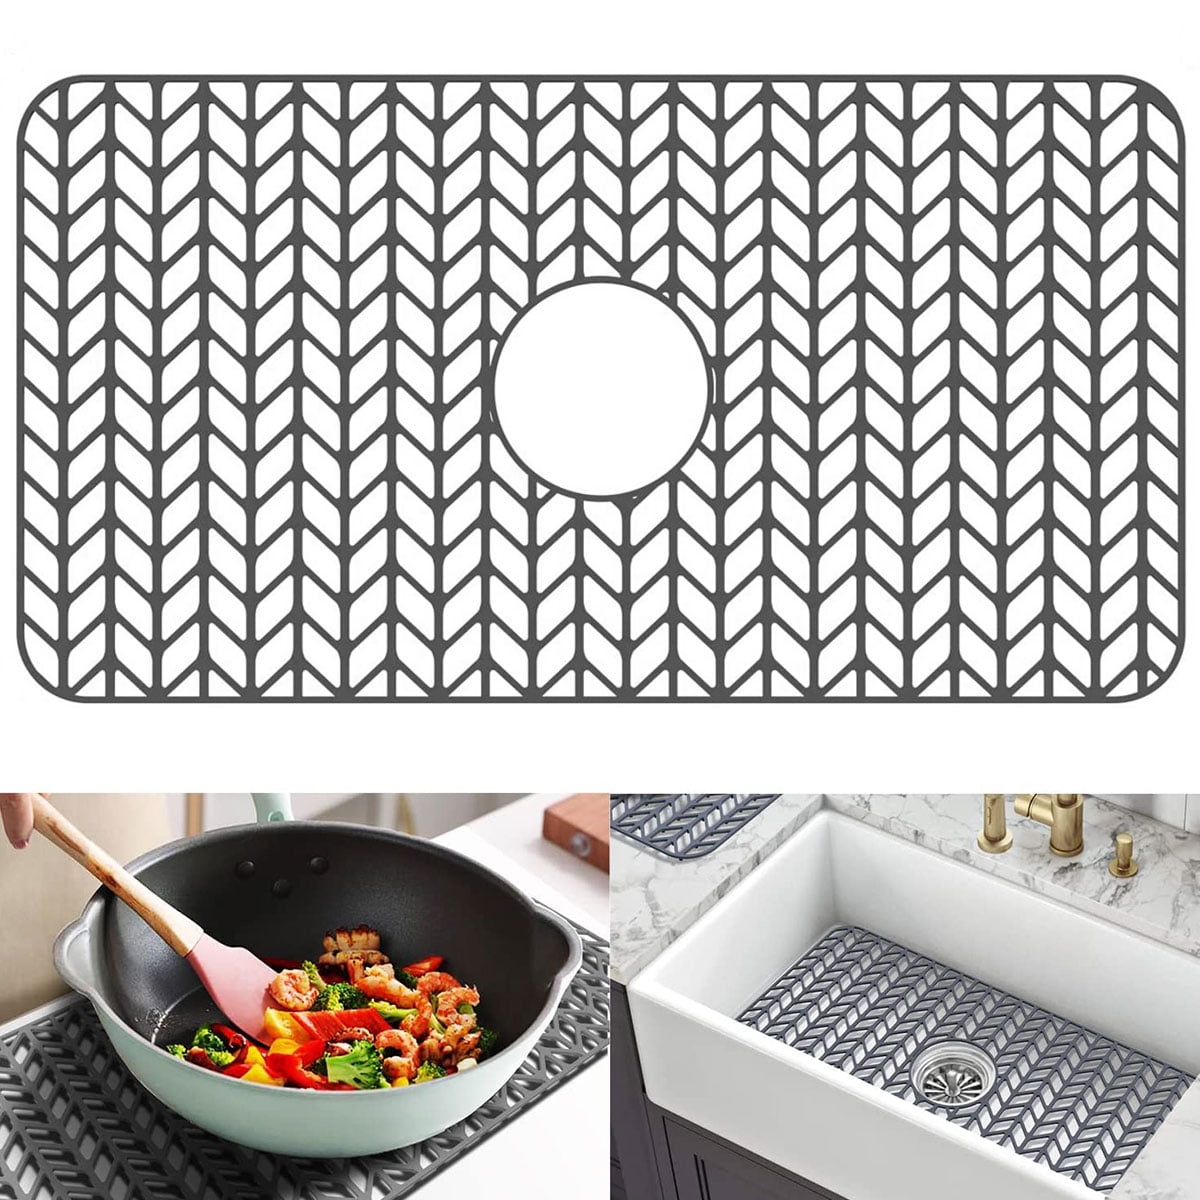 Jokapy Silicone Sink Mat, Kitchen Sink Protector Grid Accessory with Center Drain, 26 inchx 14 inch, Size: Upper Hole